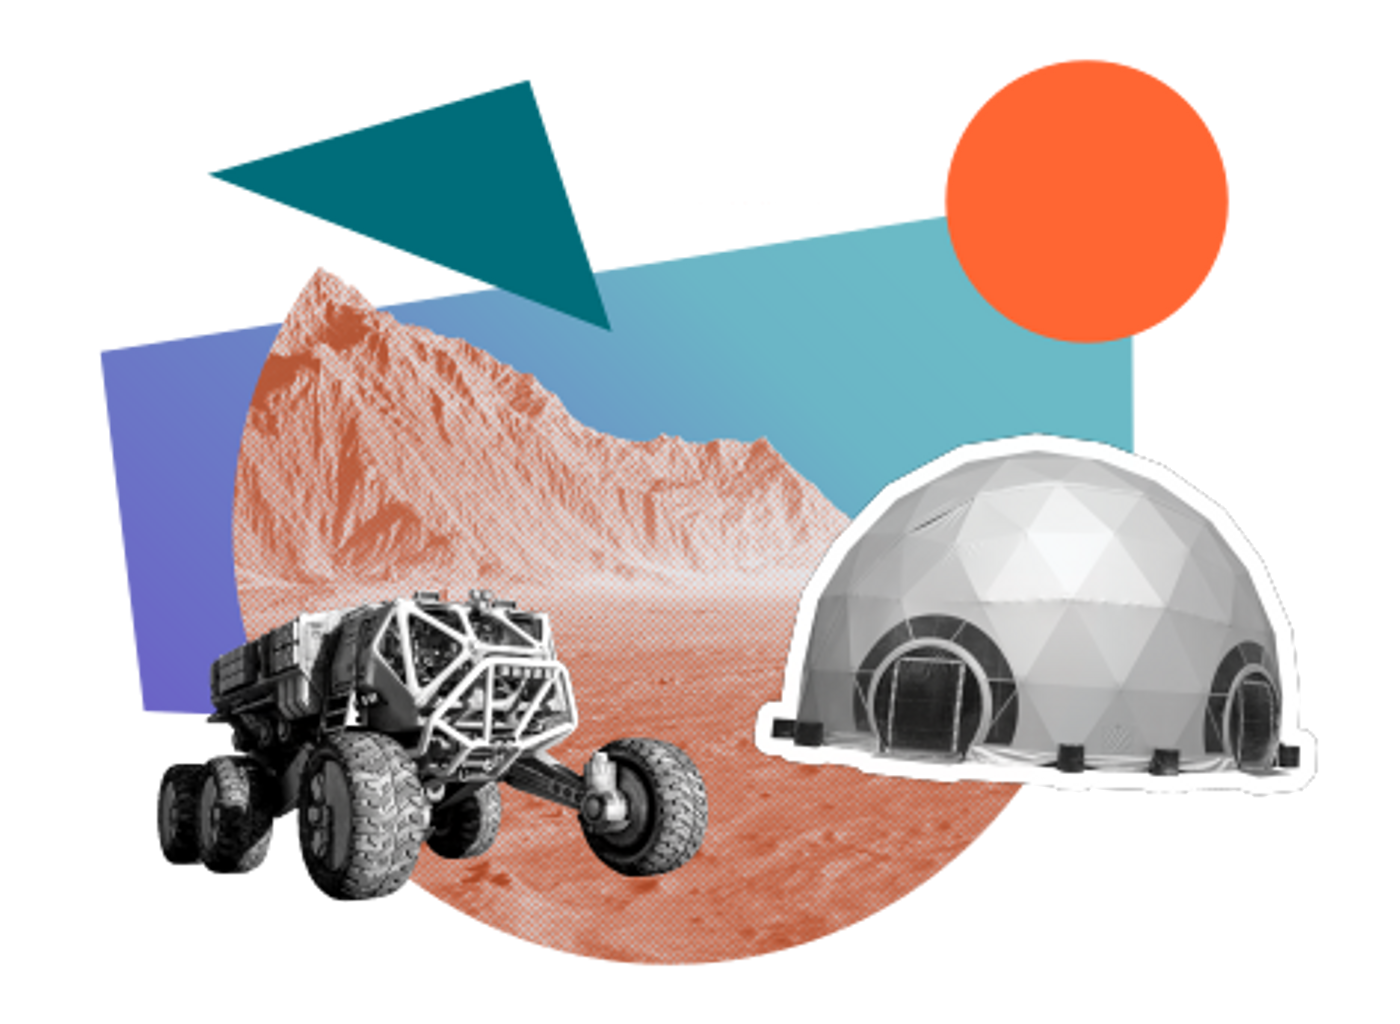 A Mars rover and a space base in front of multi-coloured shapes